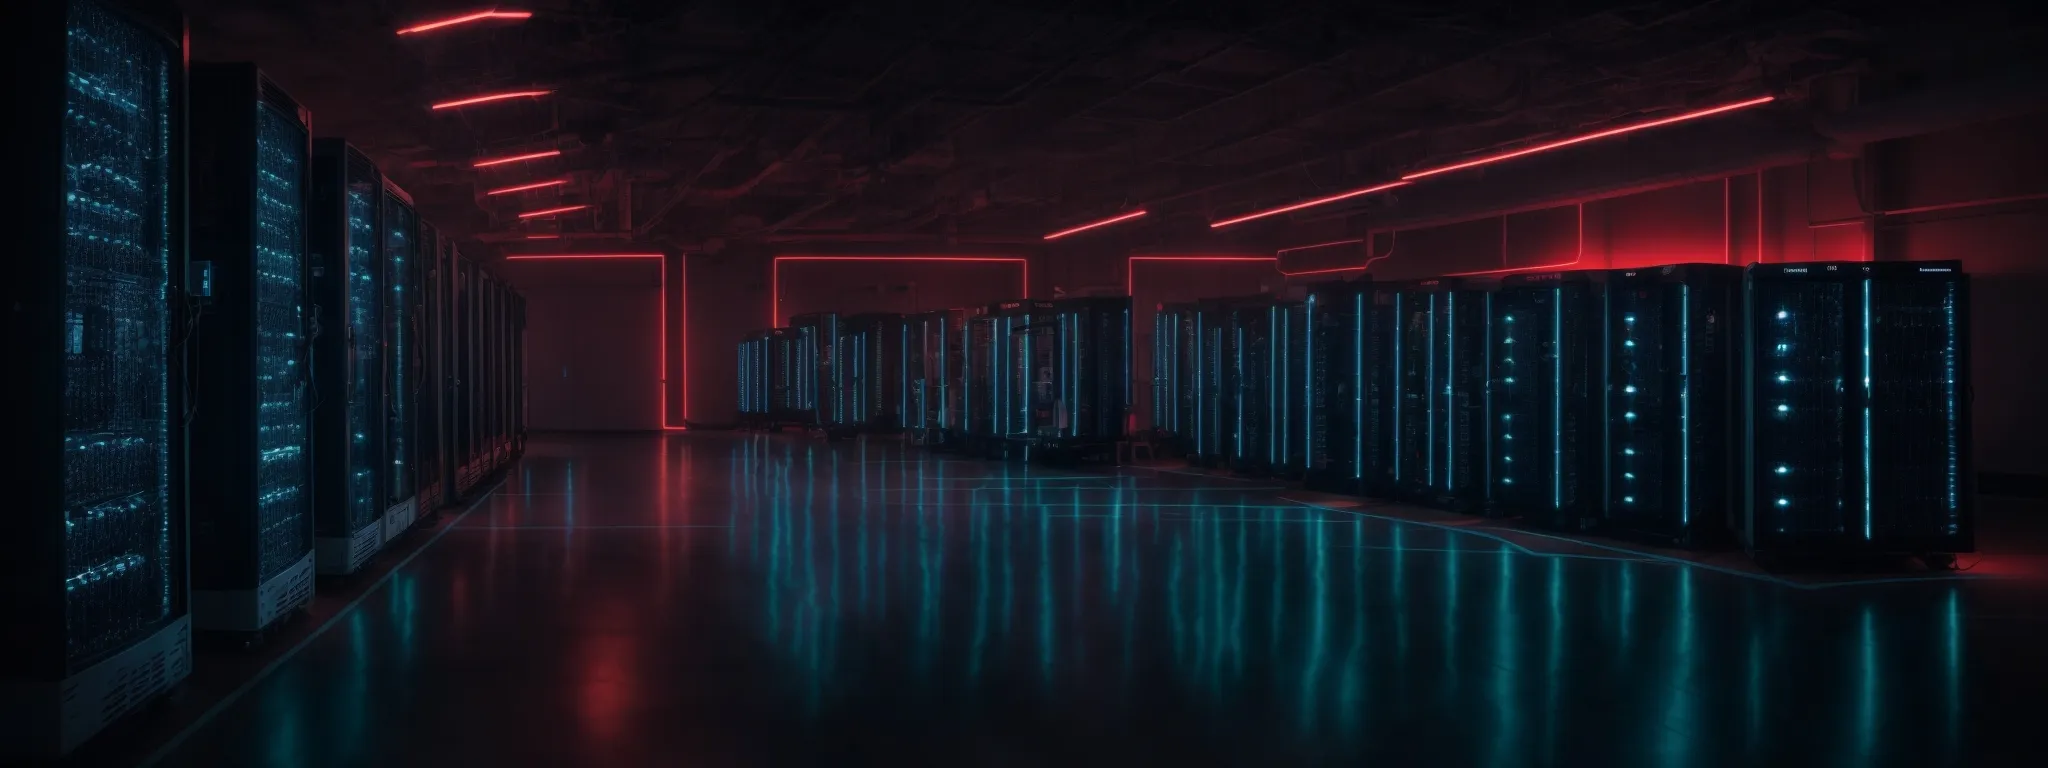 a row of servers with glowing led lights in a dim data center room.